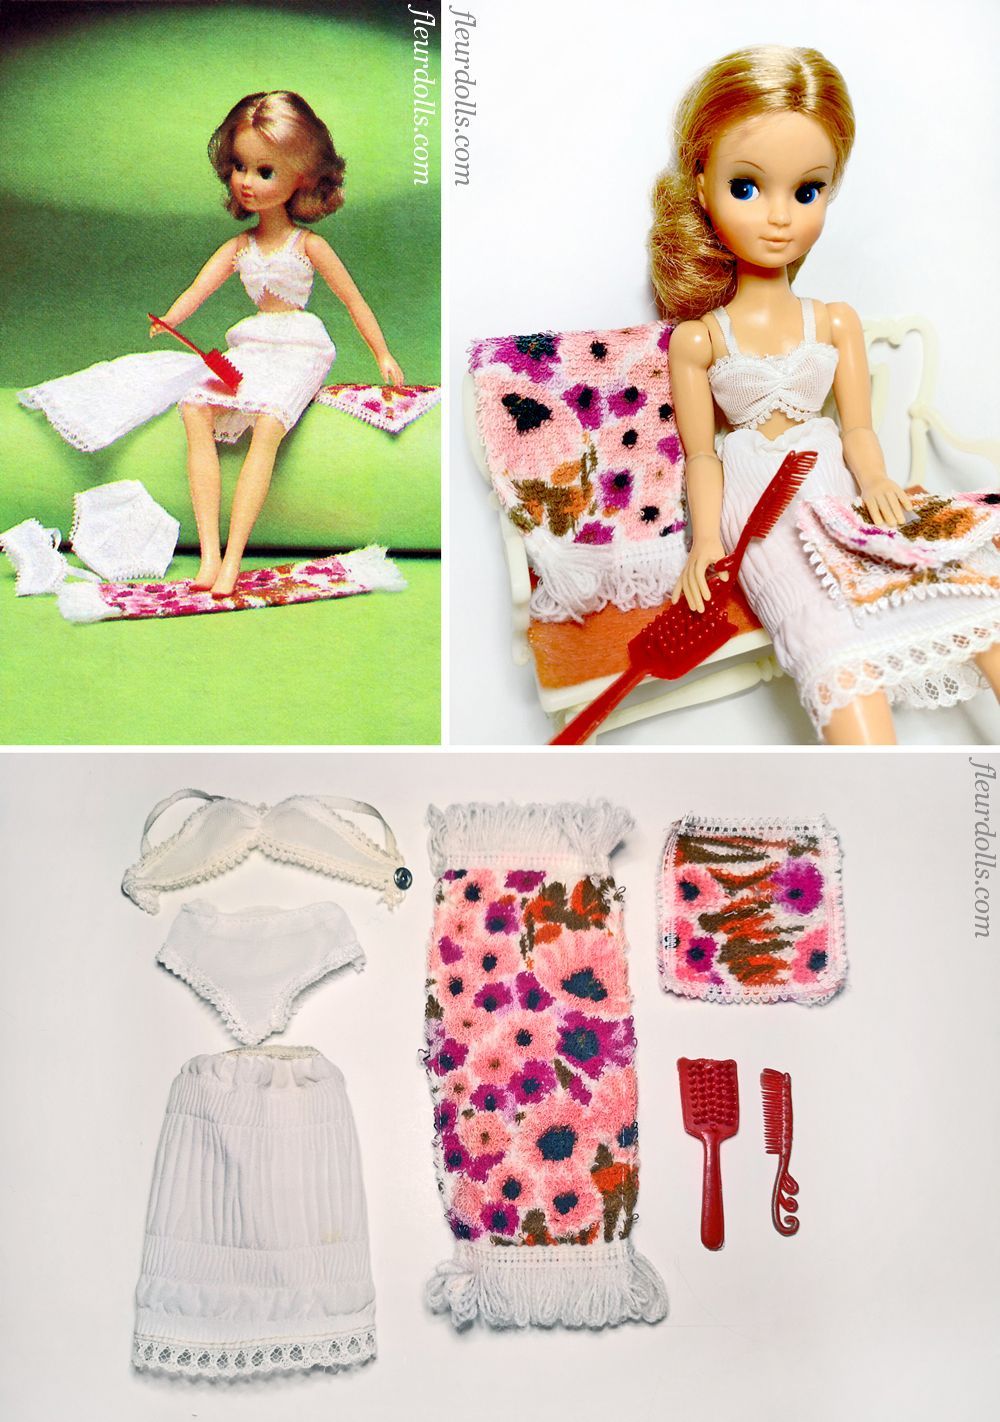 Fleur doll fashion 1215 white lingerie flower towel hard to find outfit